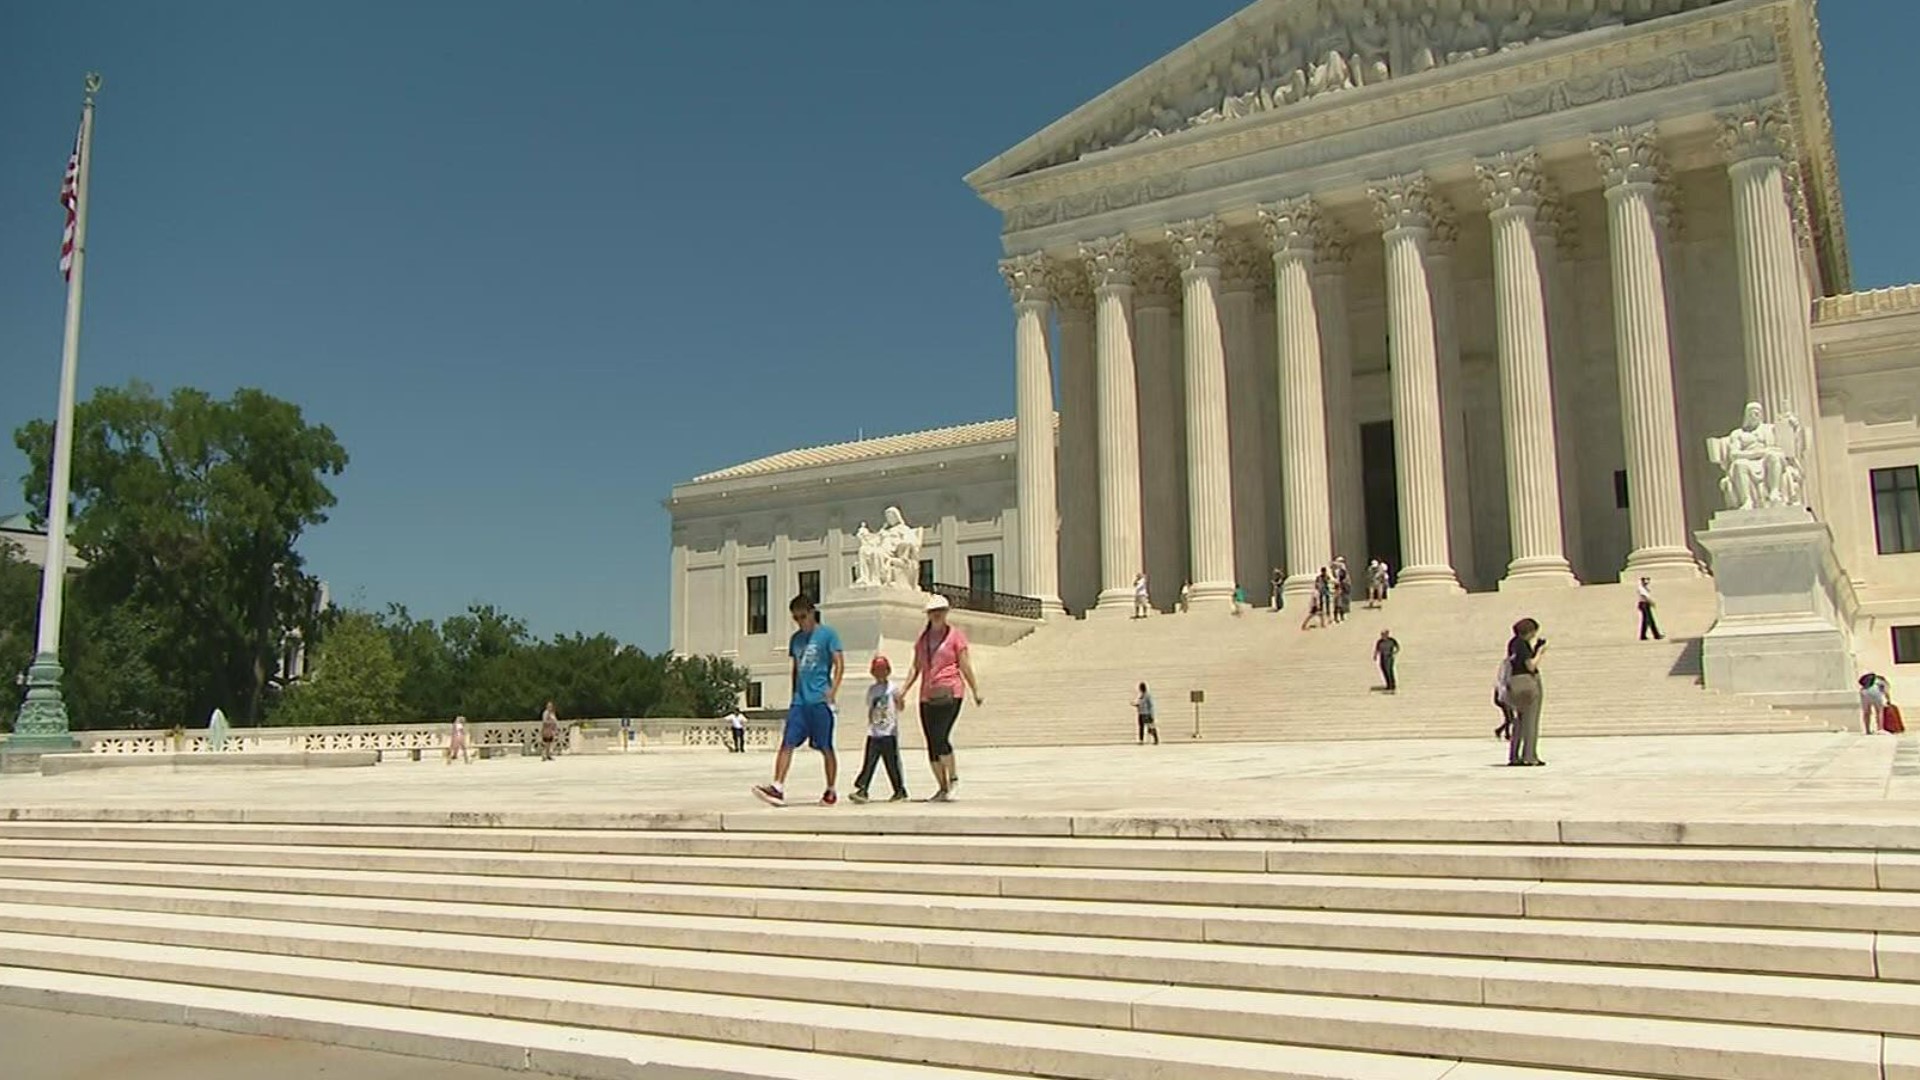 Many viewers wrote us with questions about what happens now that Roe v. Wade is overturned.